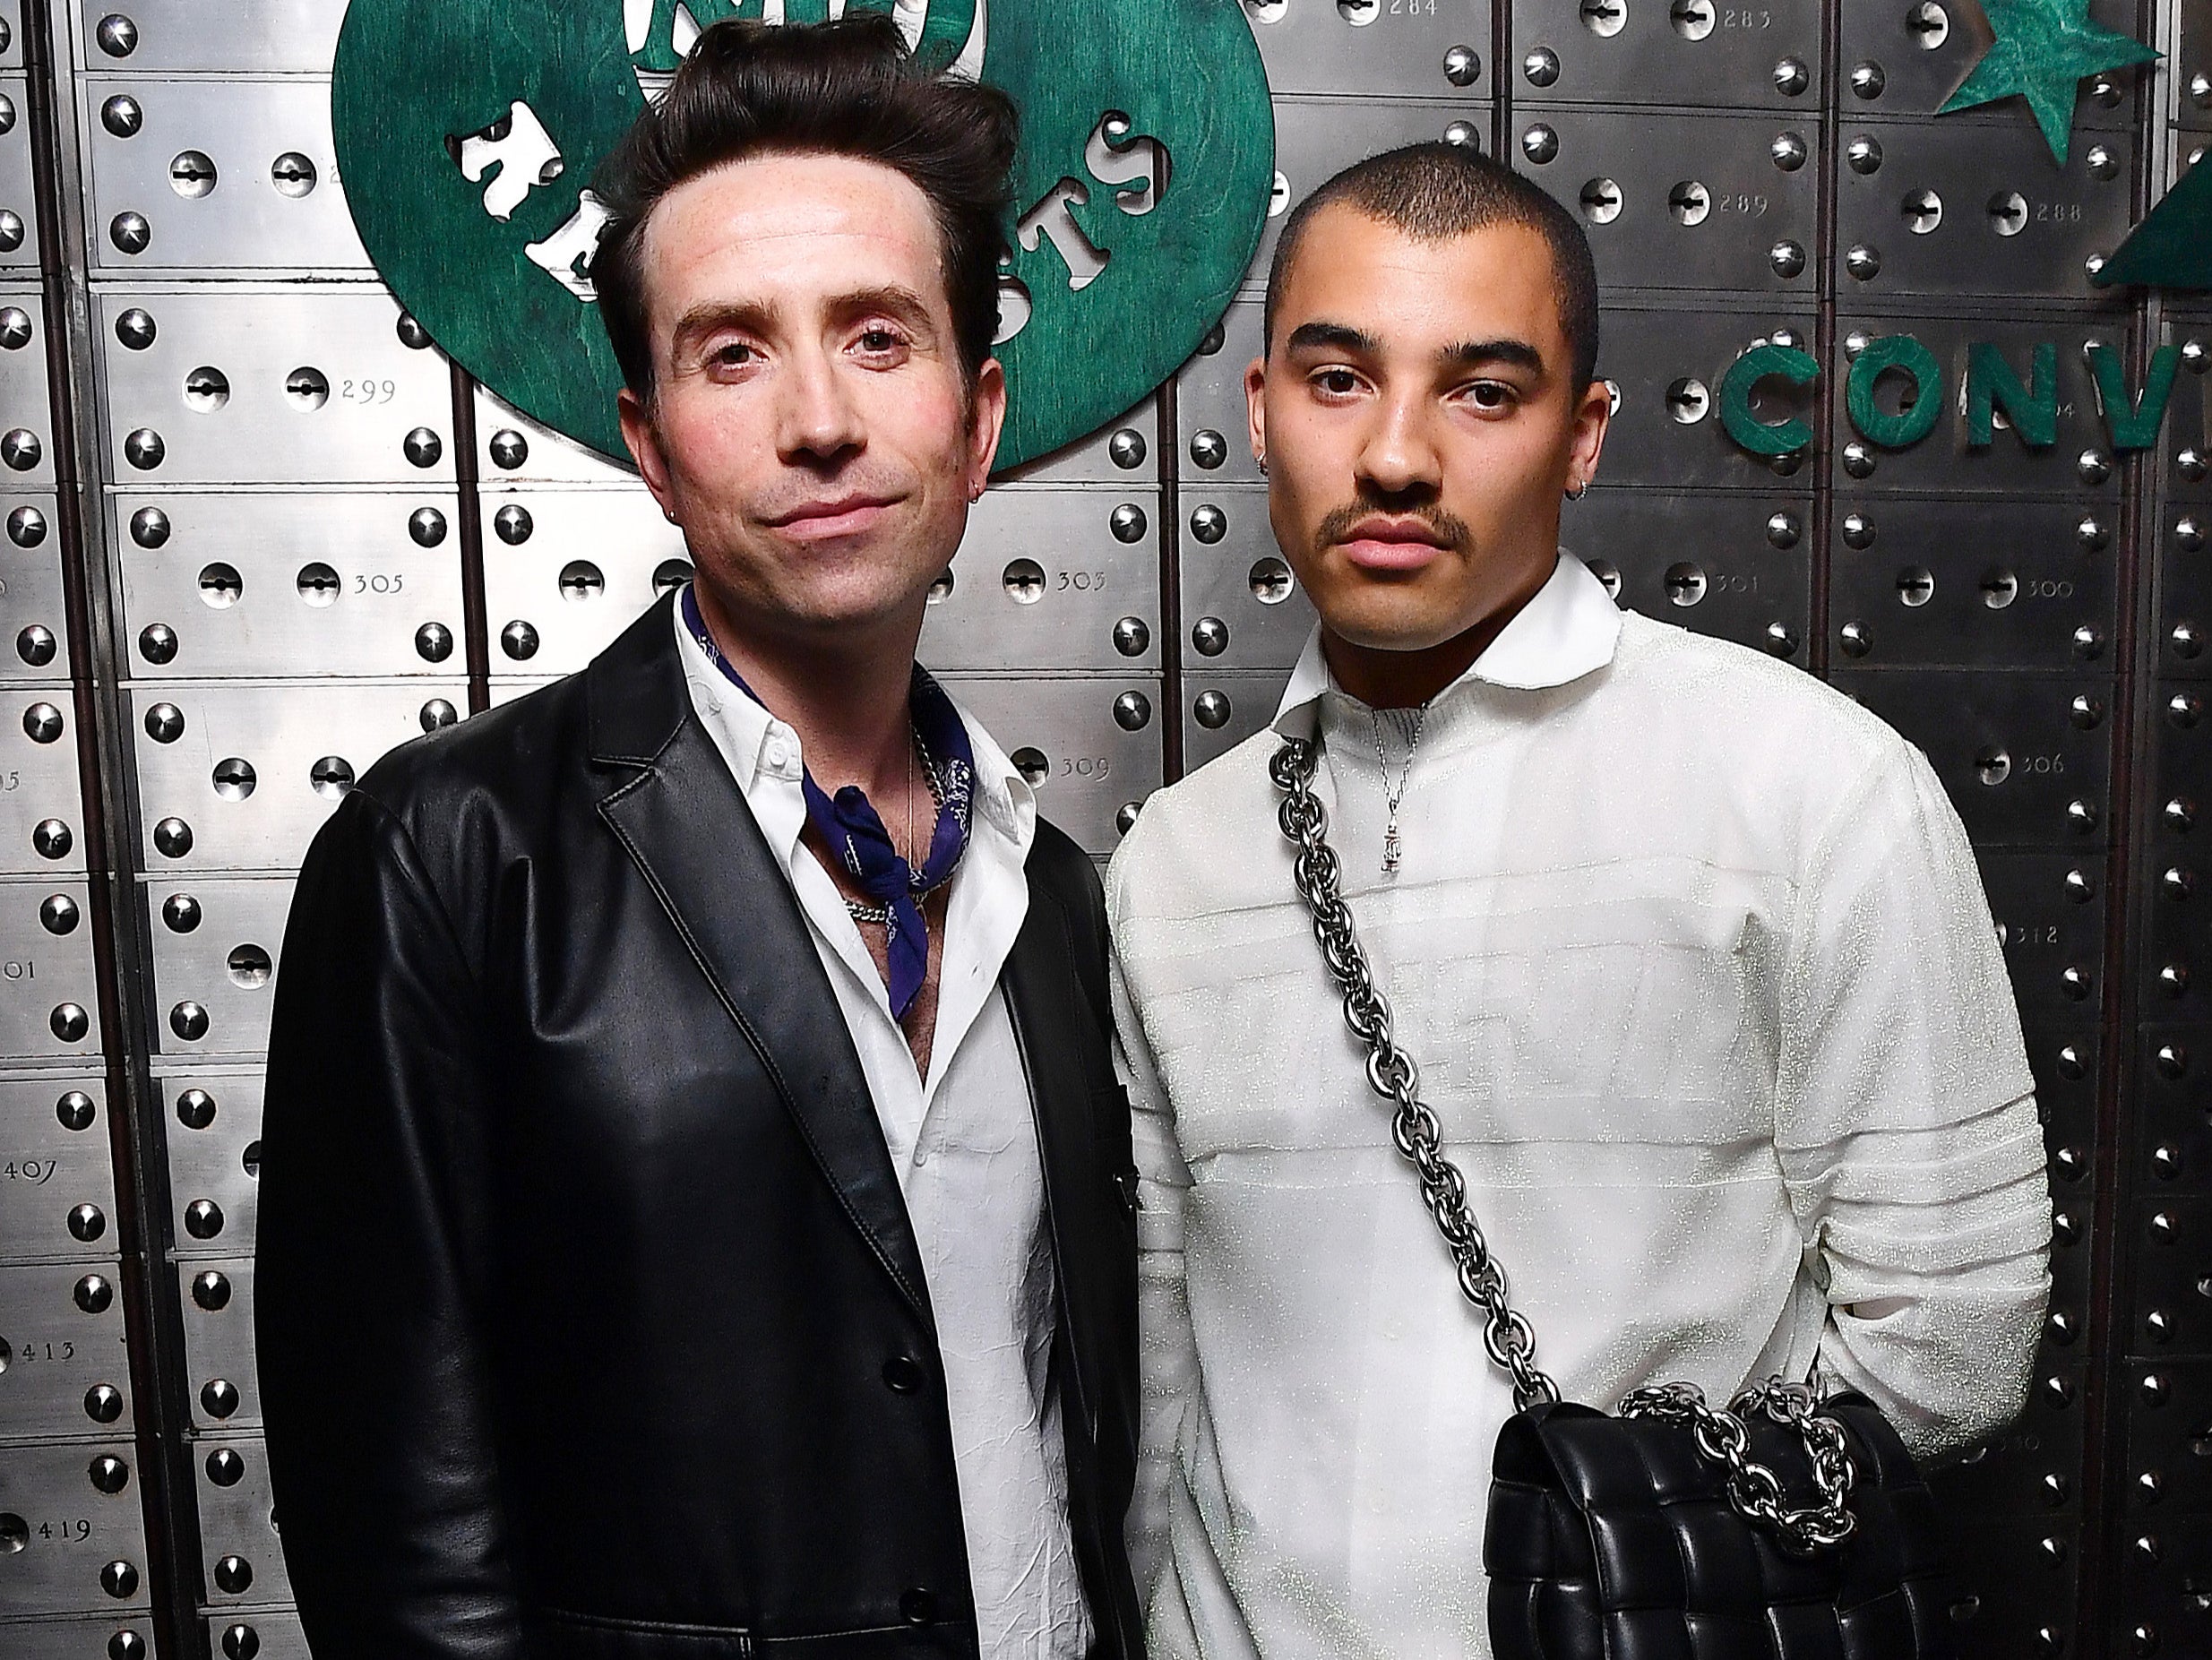 Nick Grimshaw and Meshach Henry attend the launch party for 'No Requests' label in partnership with Converse at The Ned on February 04, 2022